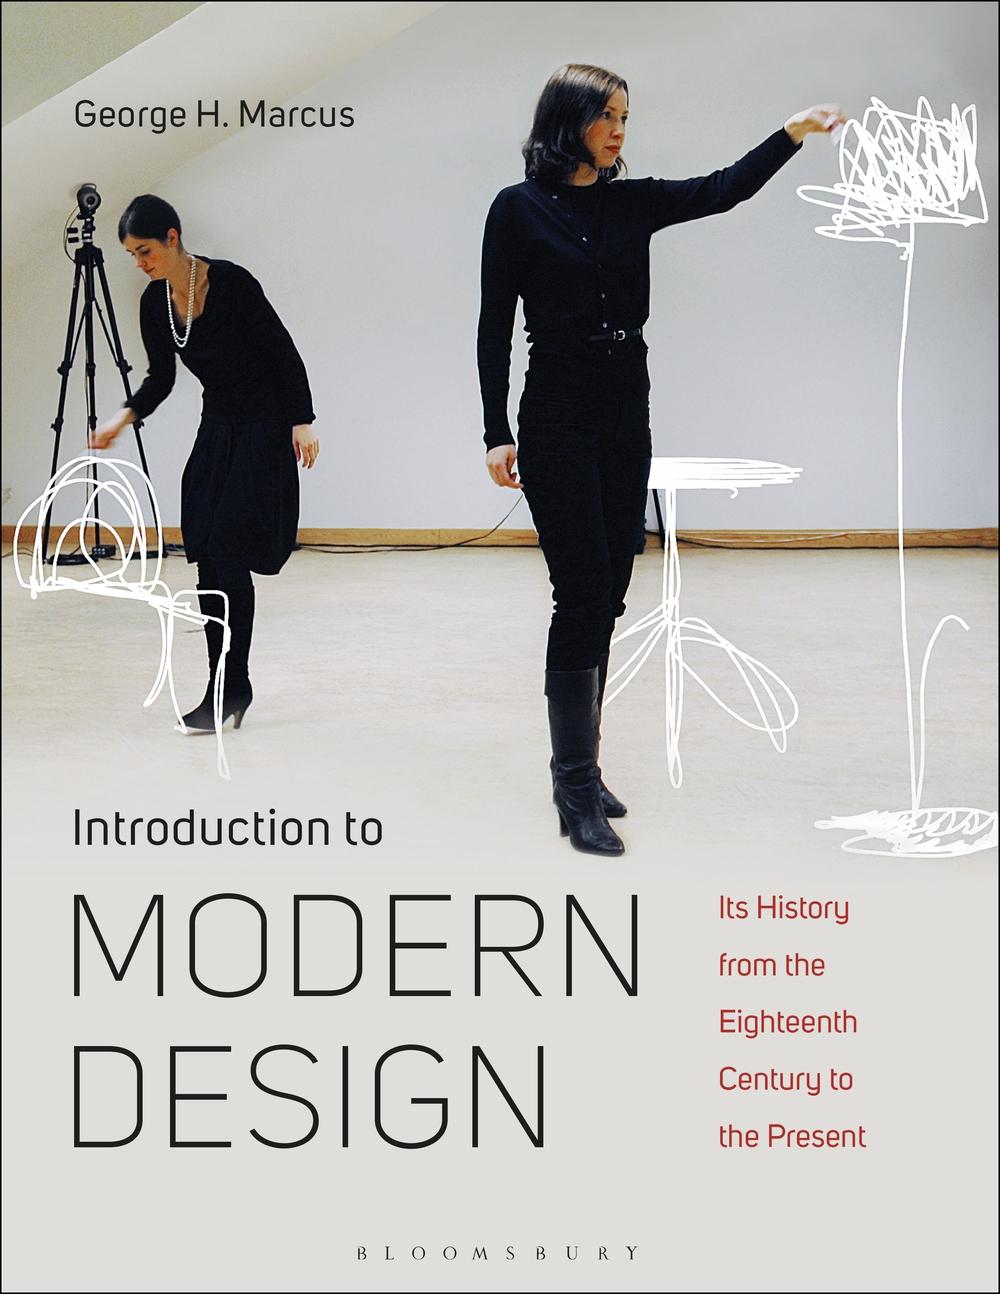 Introduction to Modern Design - George H. Marcus